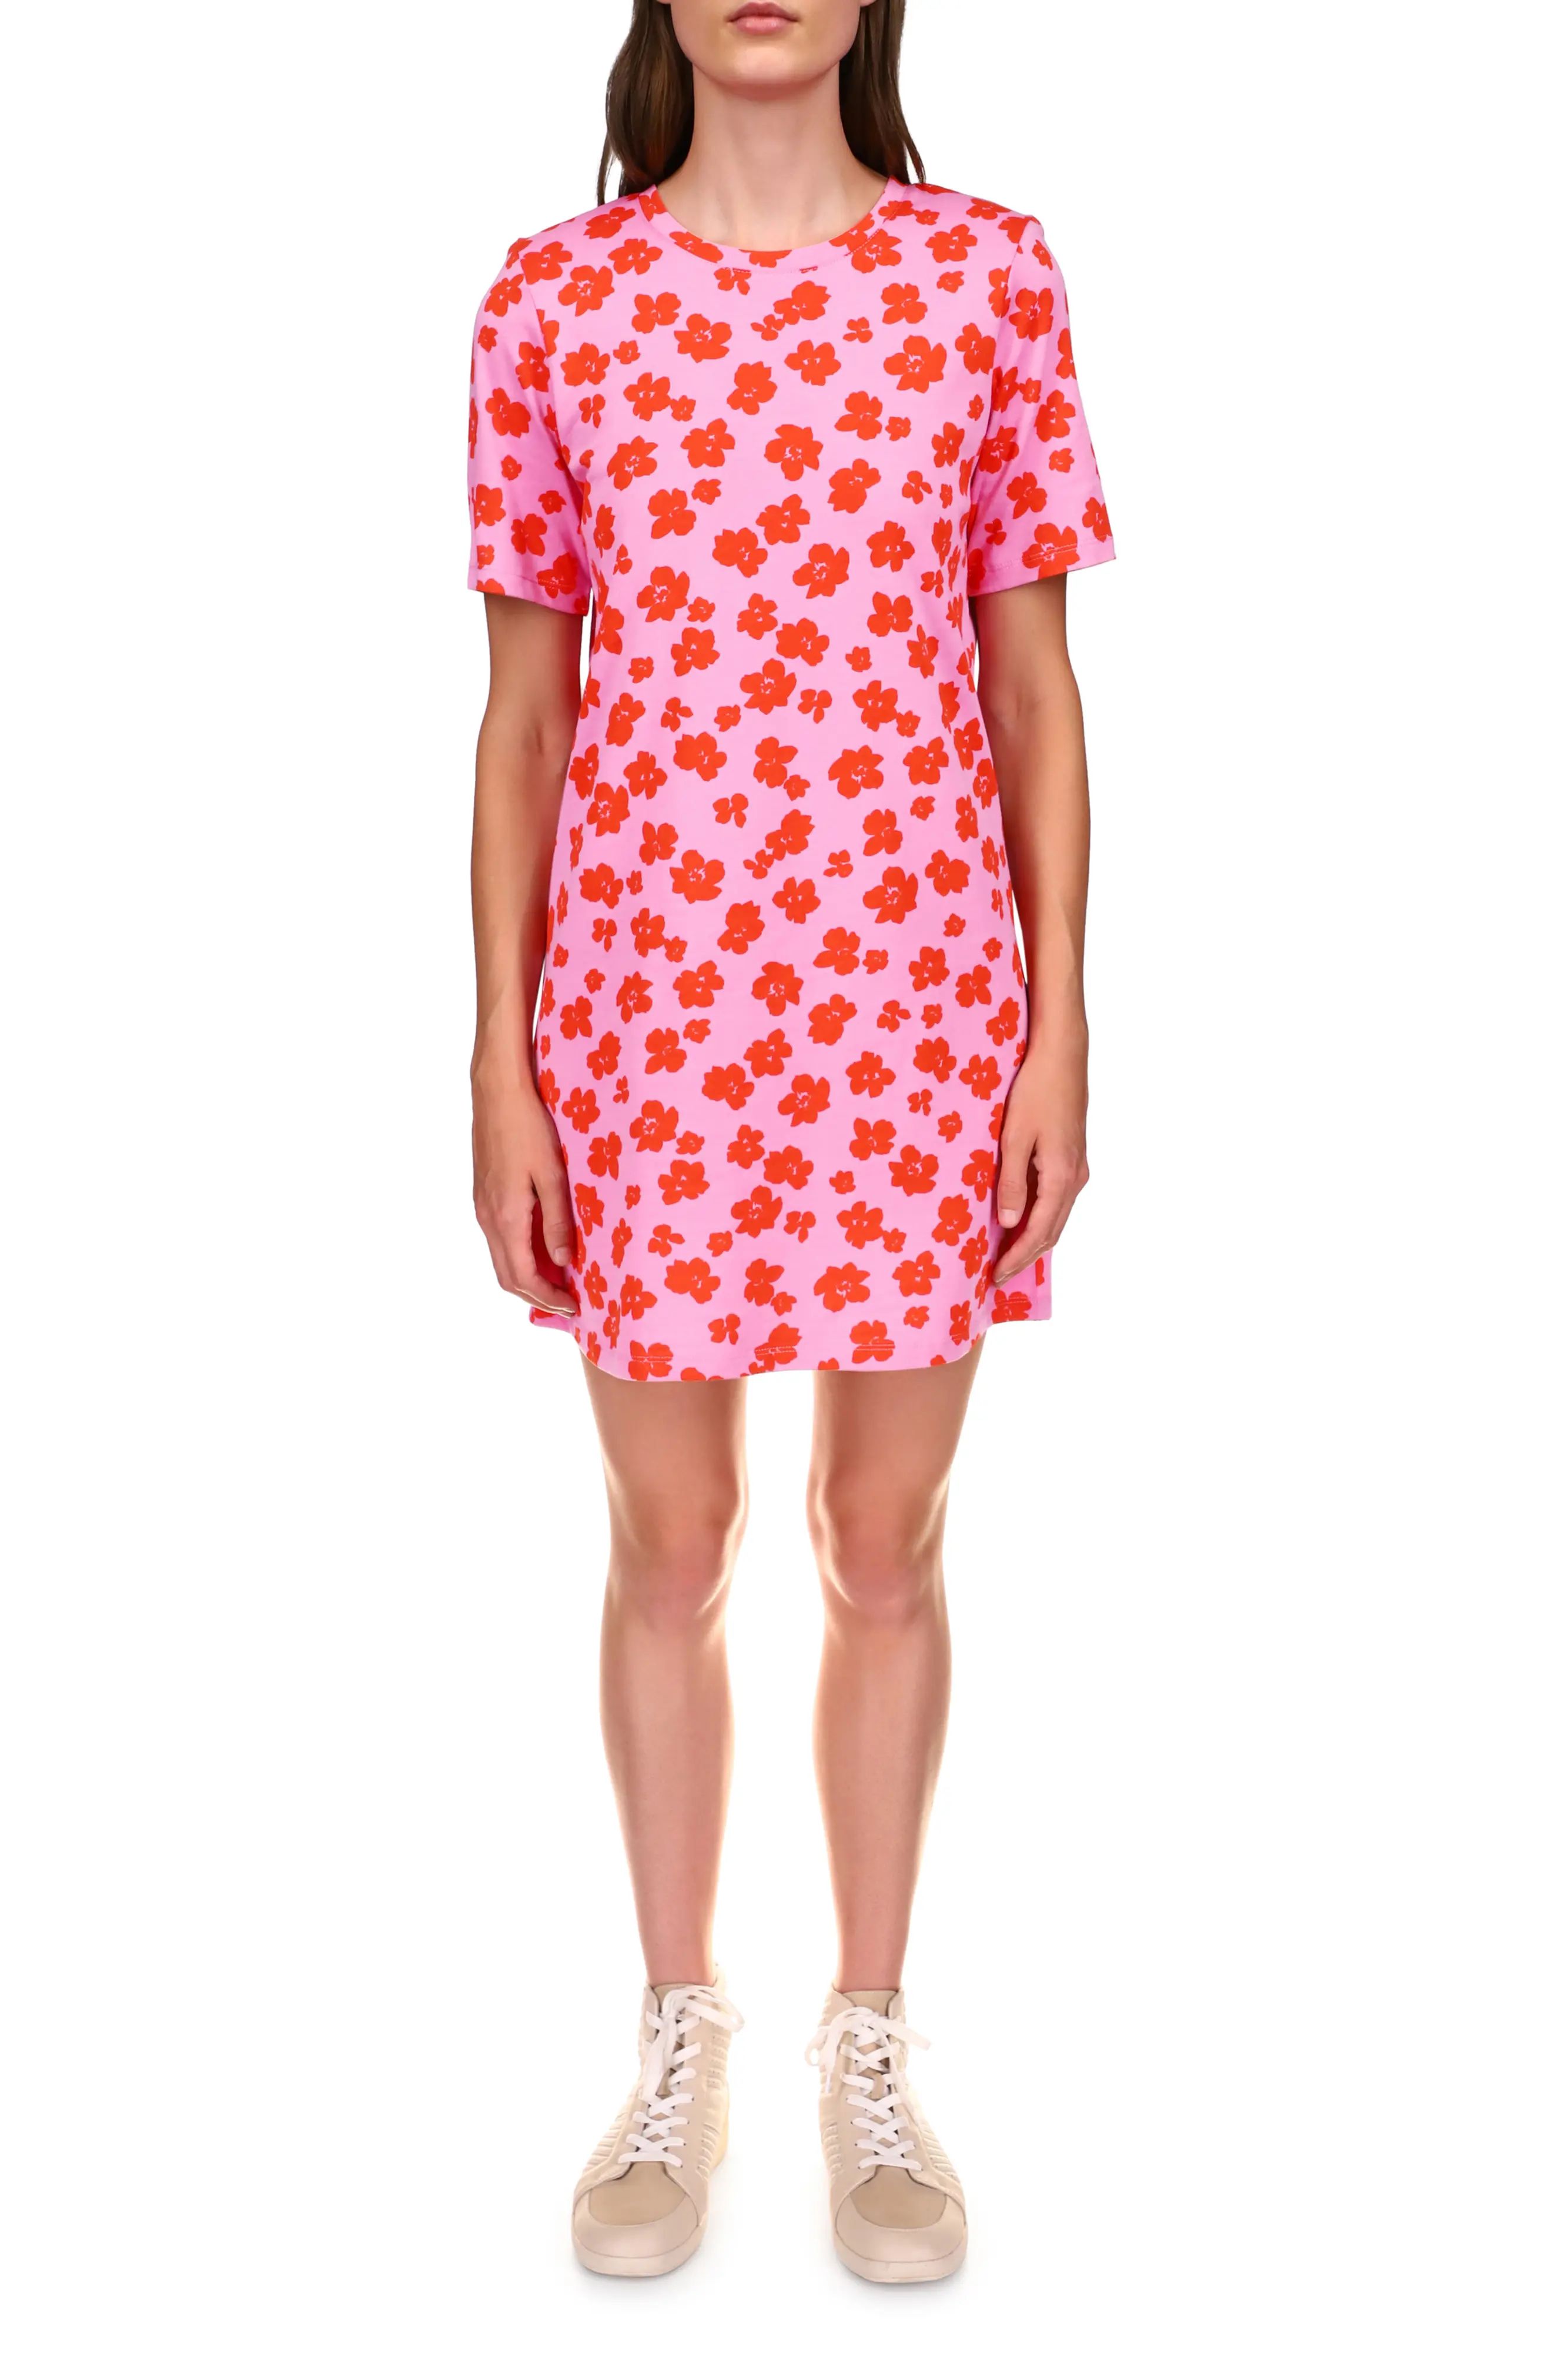 sanctuary Replay Cotton T-Shirt Dress in Cherry Kiss at Nordstrom, Size Large | Nordstrom